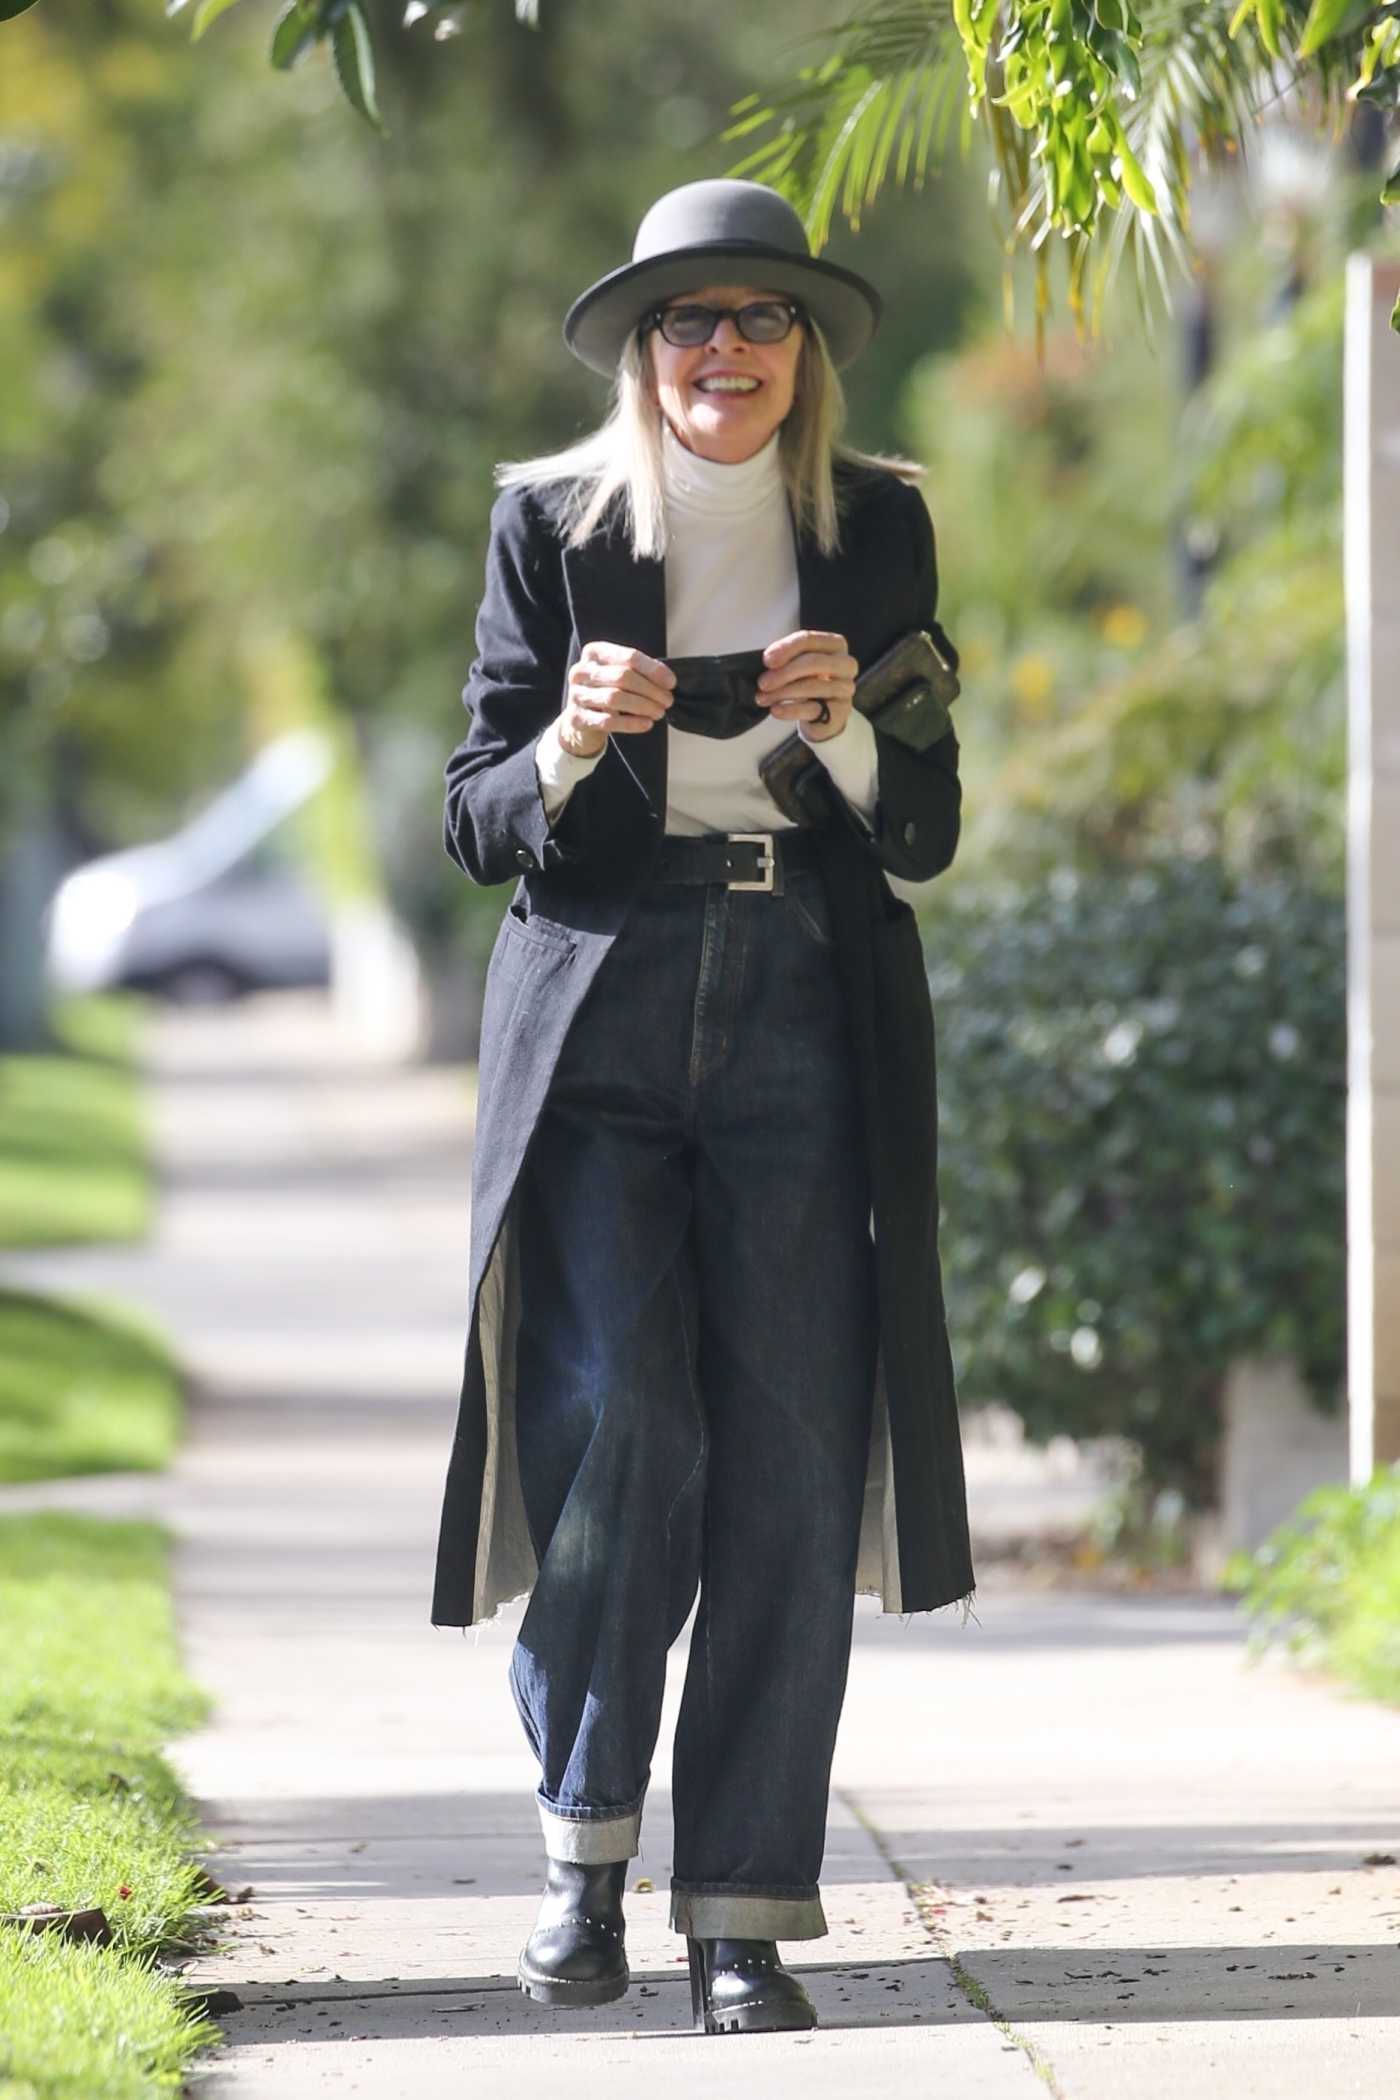 Diane Keaton in a Black Trench Coat Was Seen Out in West Hollywood  01/17/2022